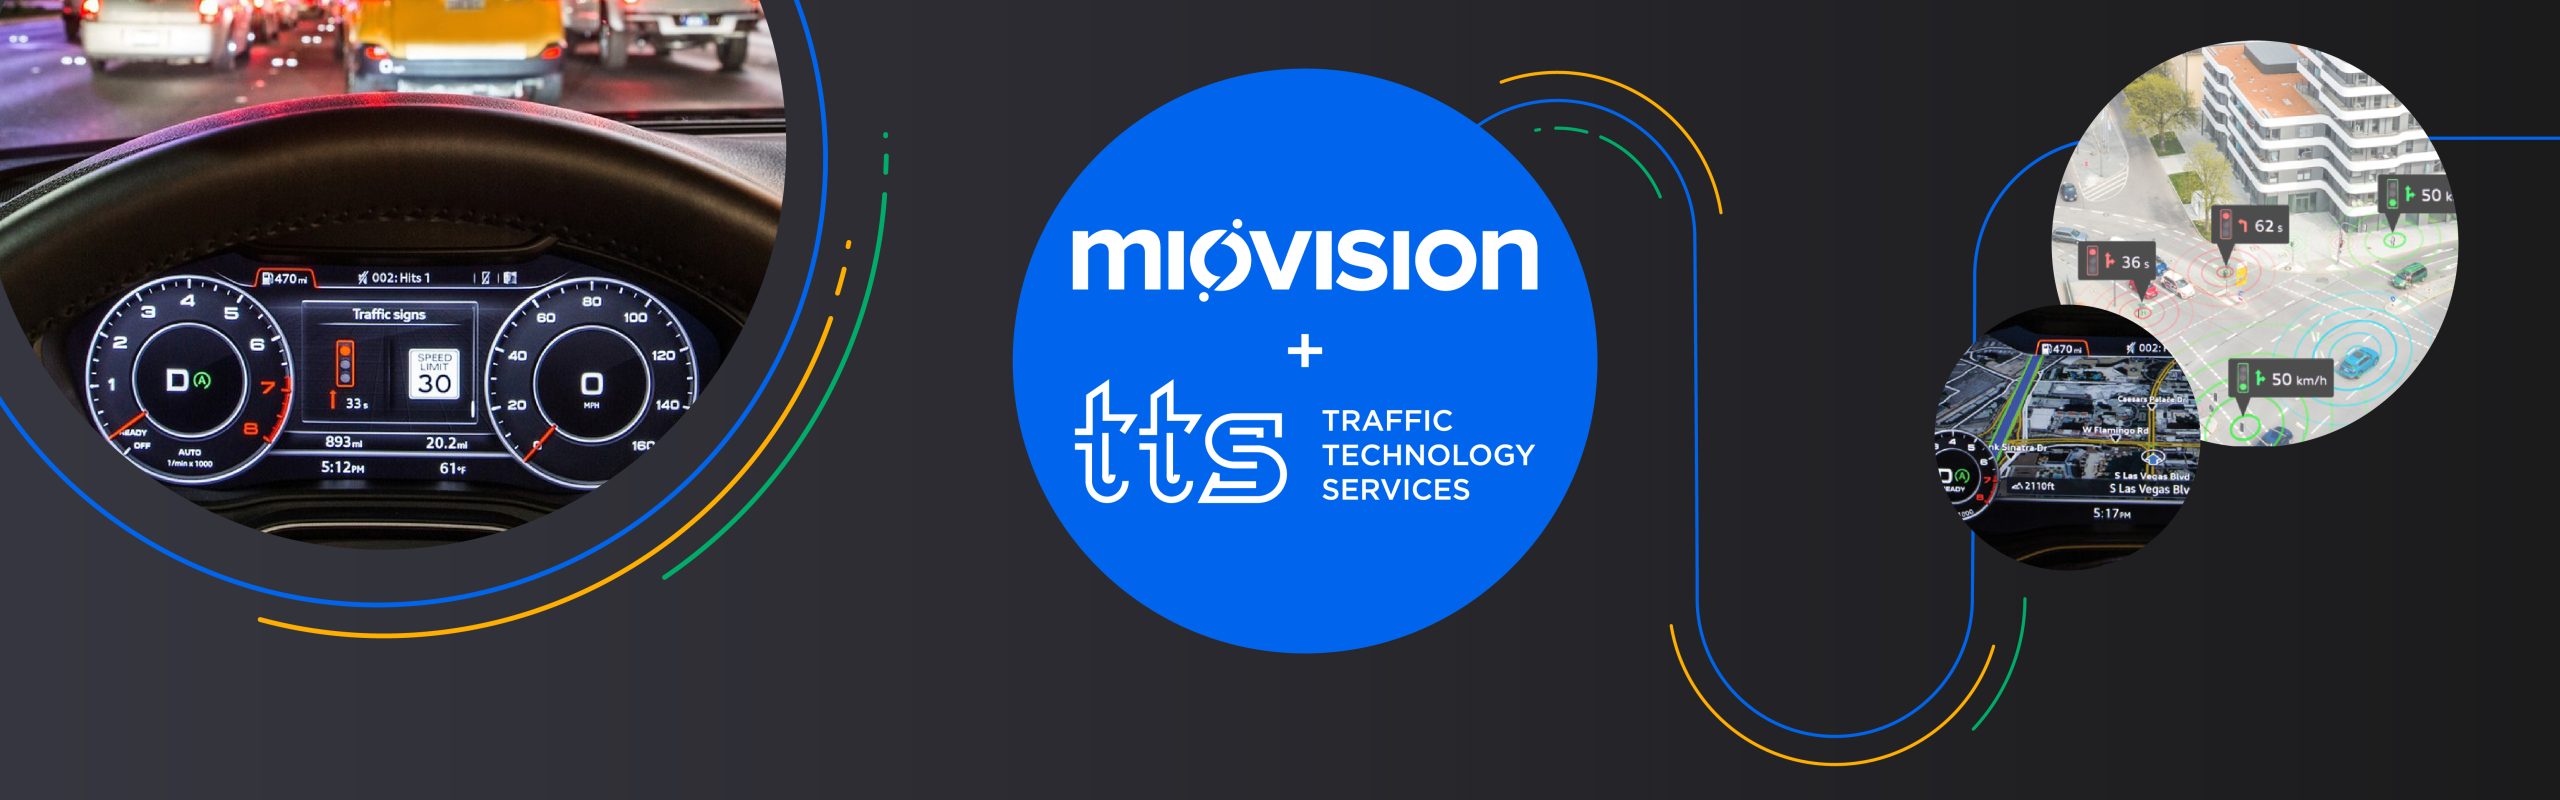 Miovision acquires Traffic Technology Services (TTS)